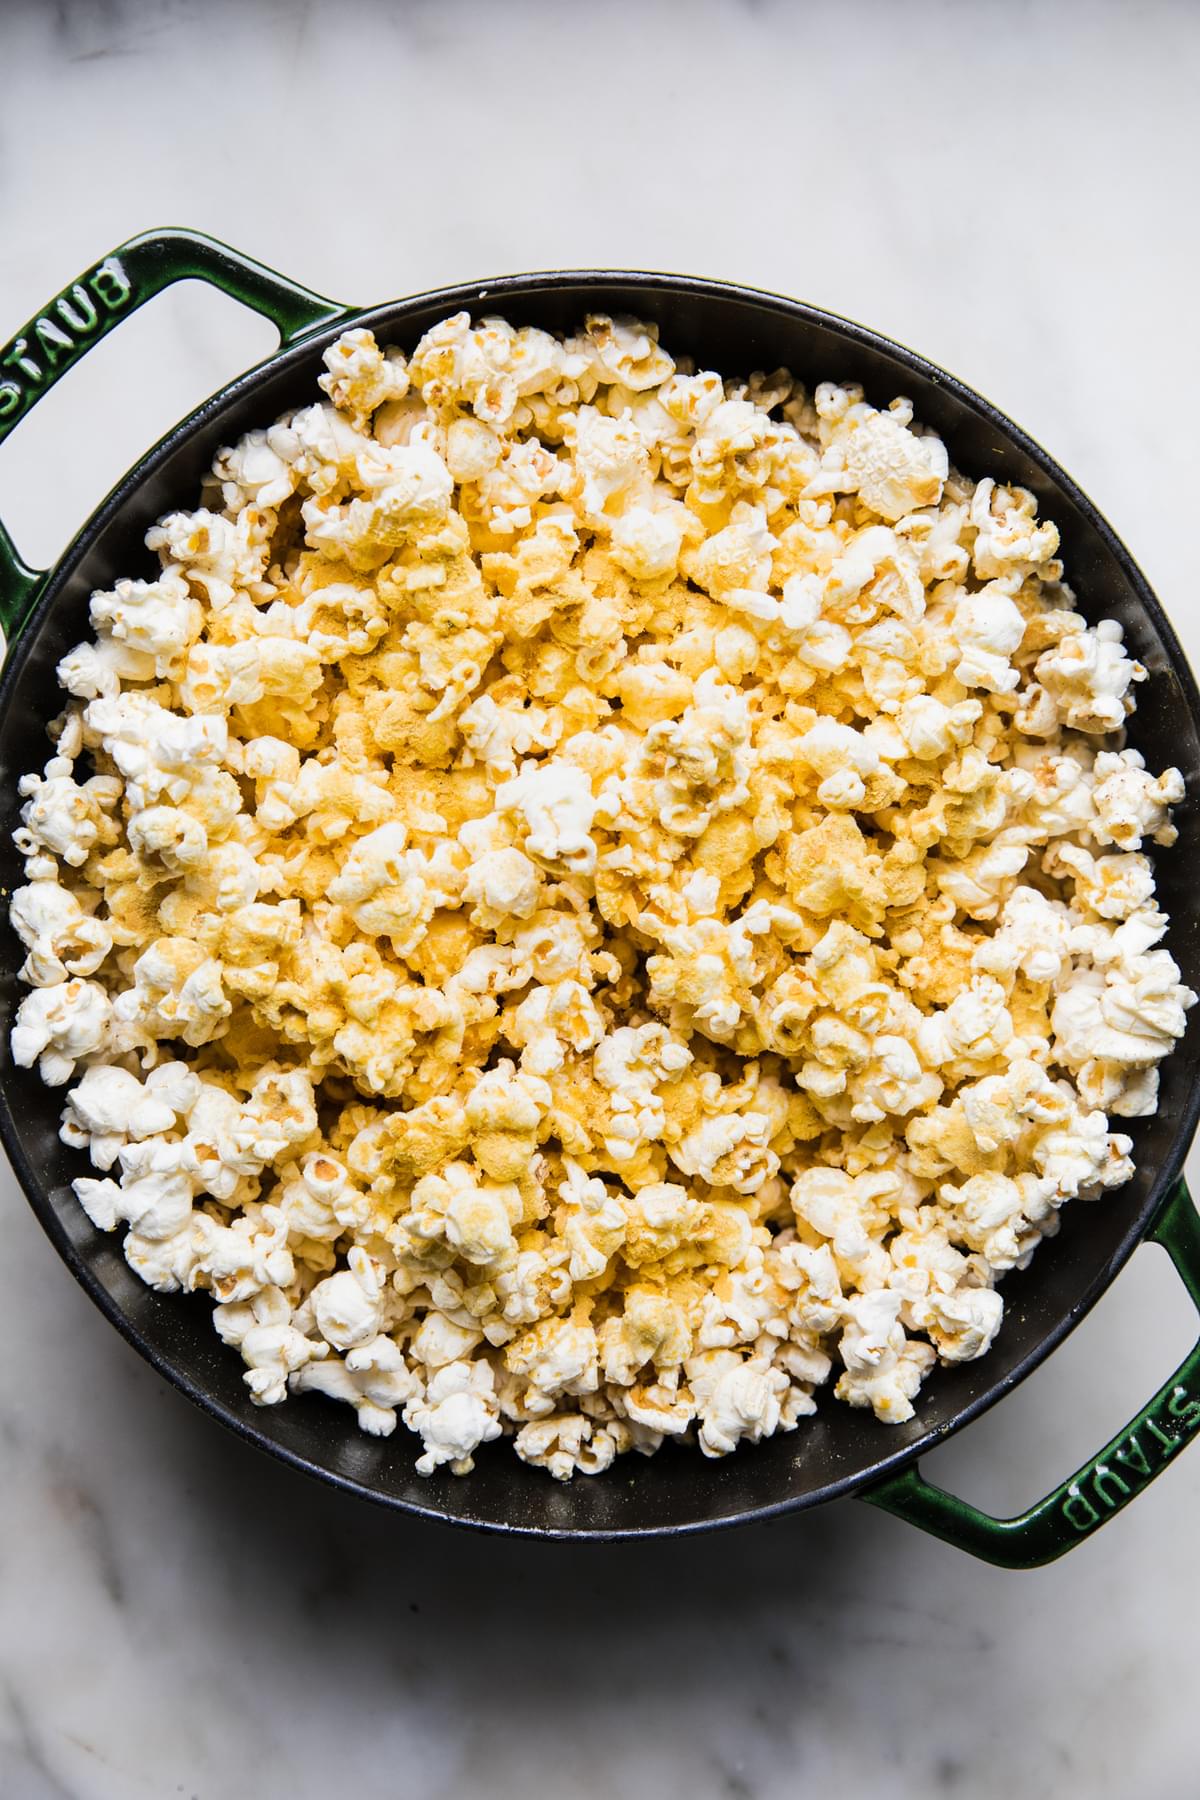 a dutch oven full of homemade buttered popcorn